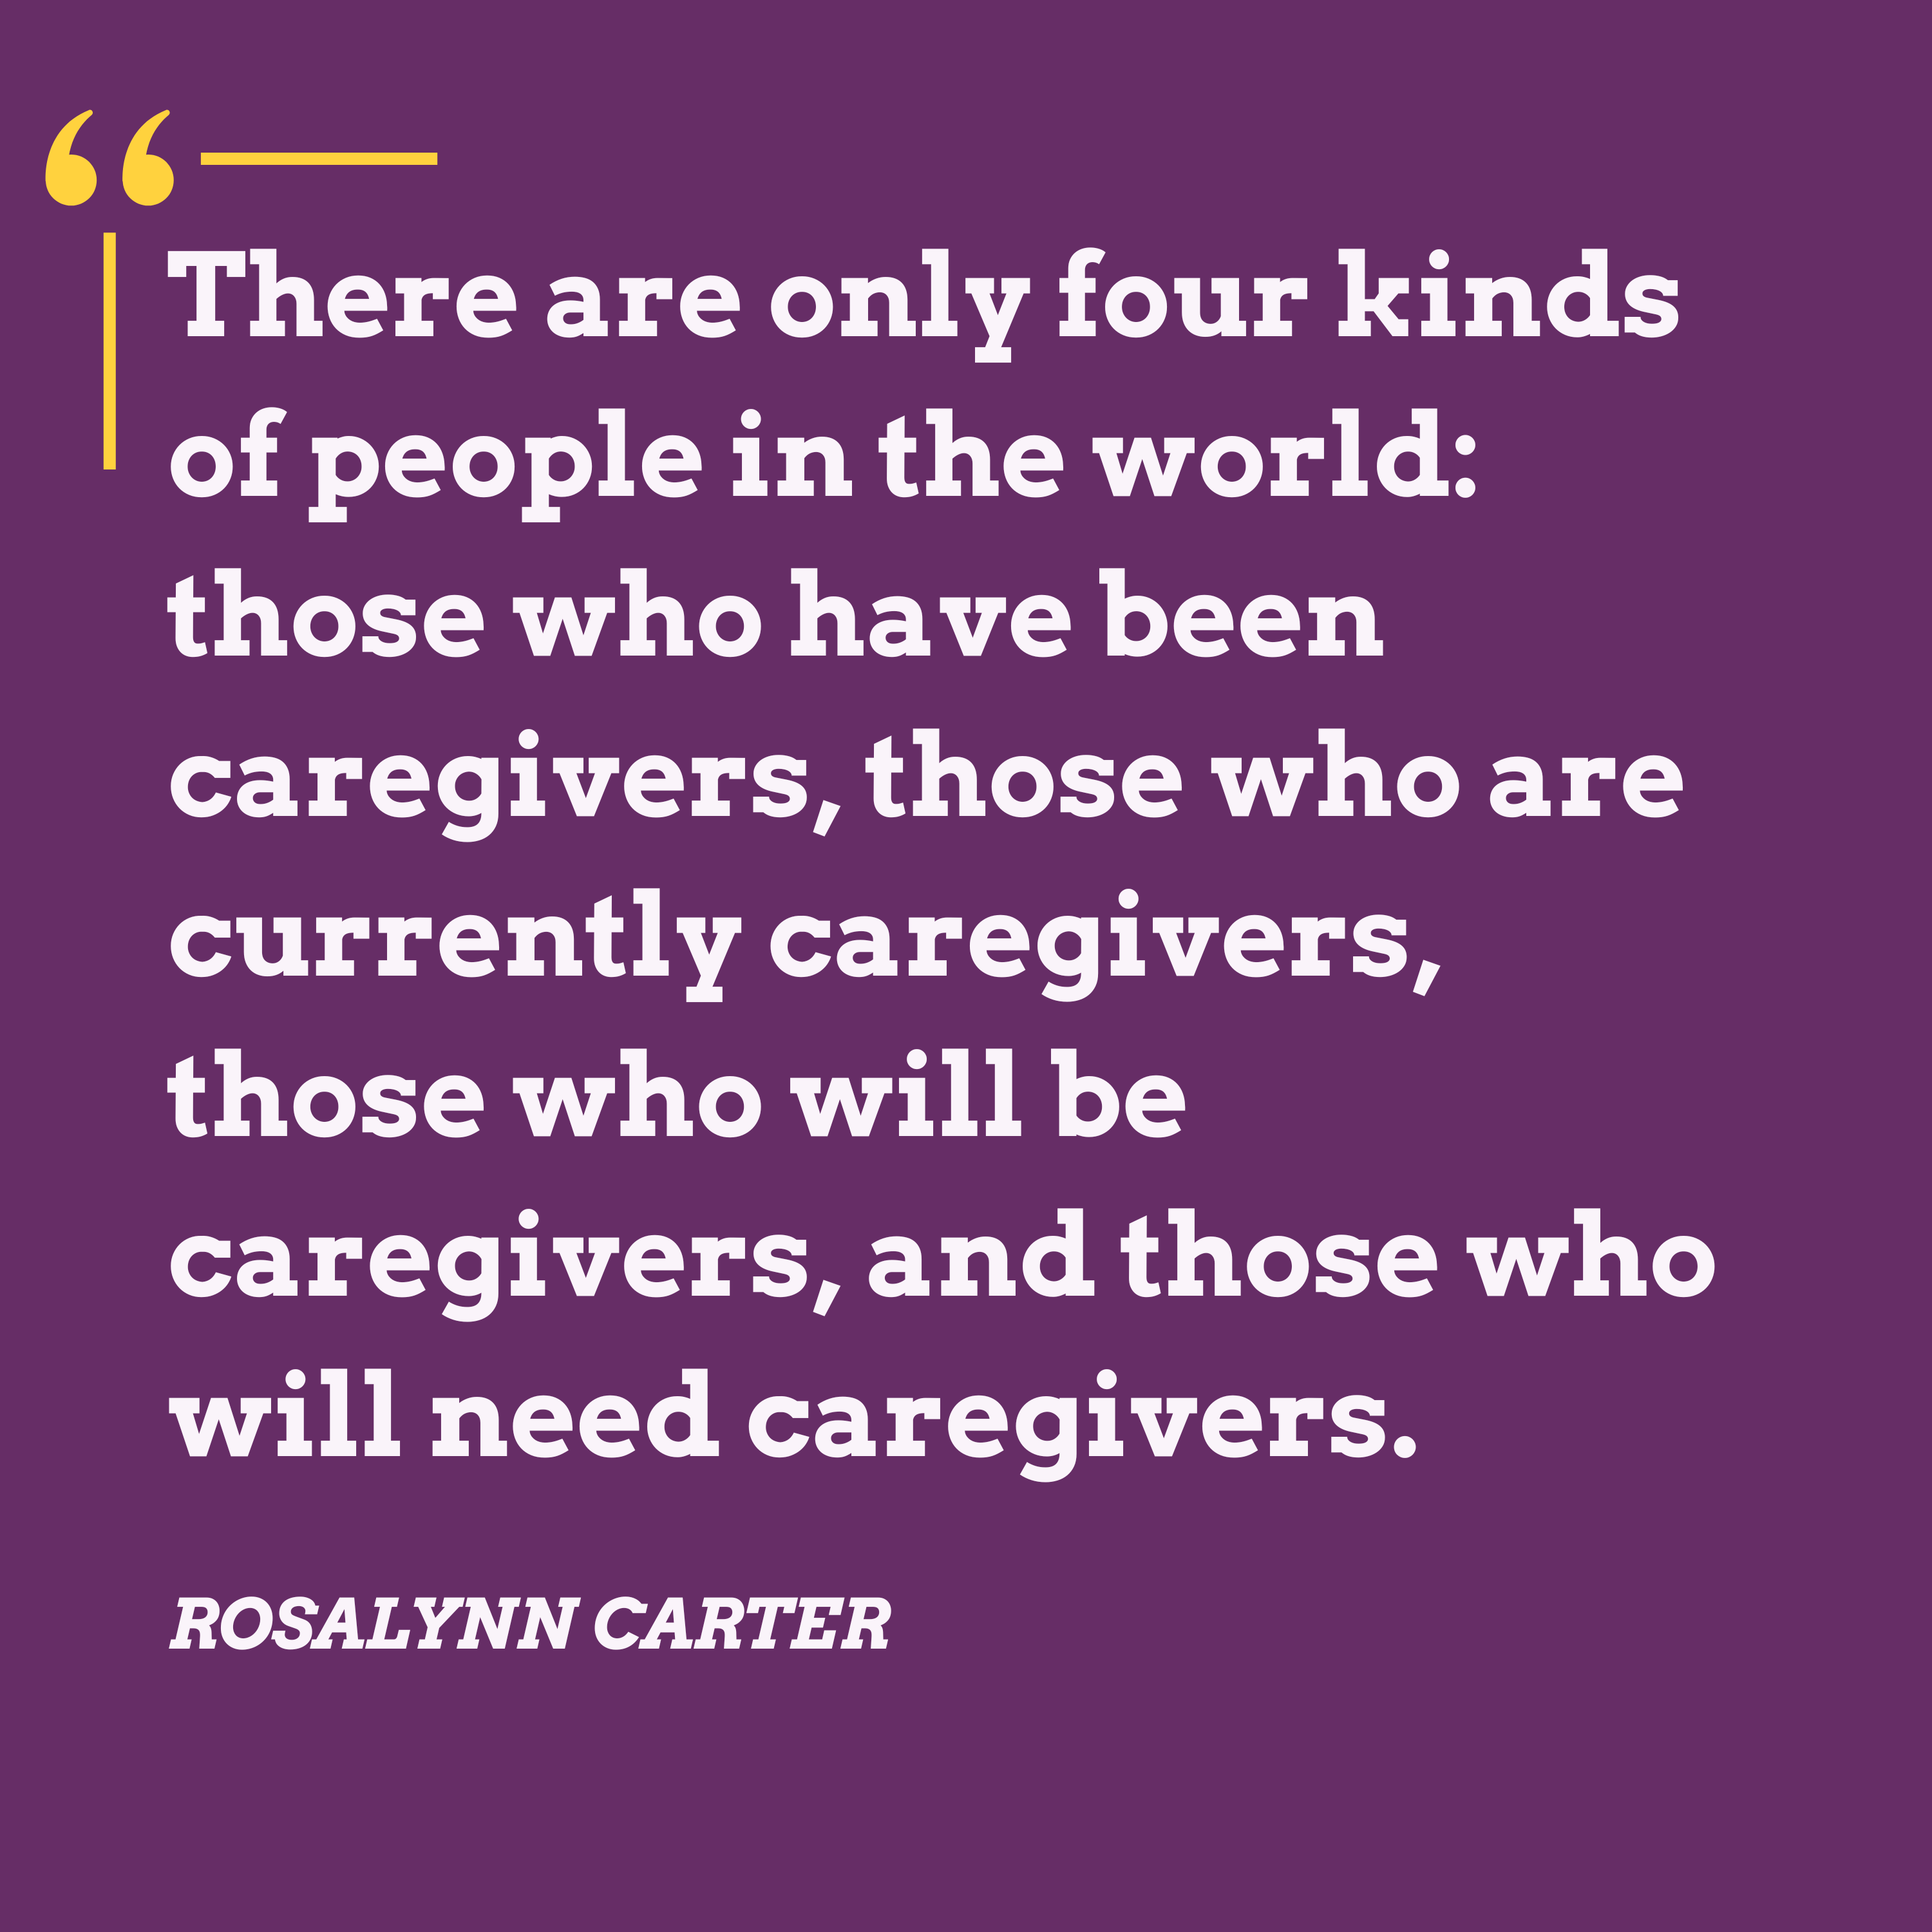 Quote on caregiving by former first lady, Rosalynn Carter